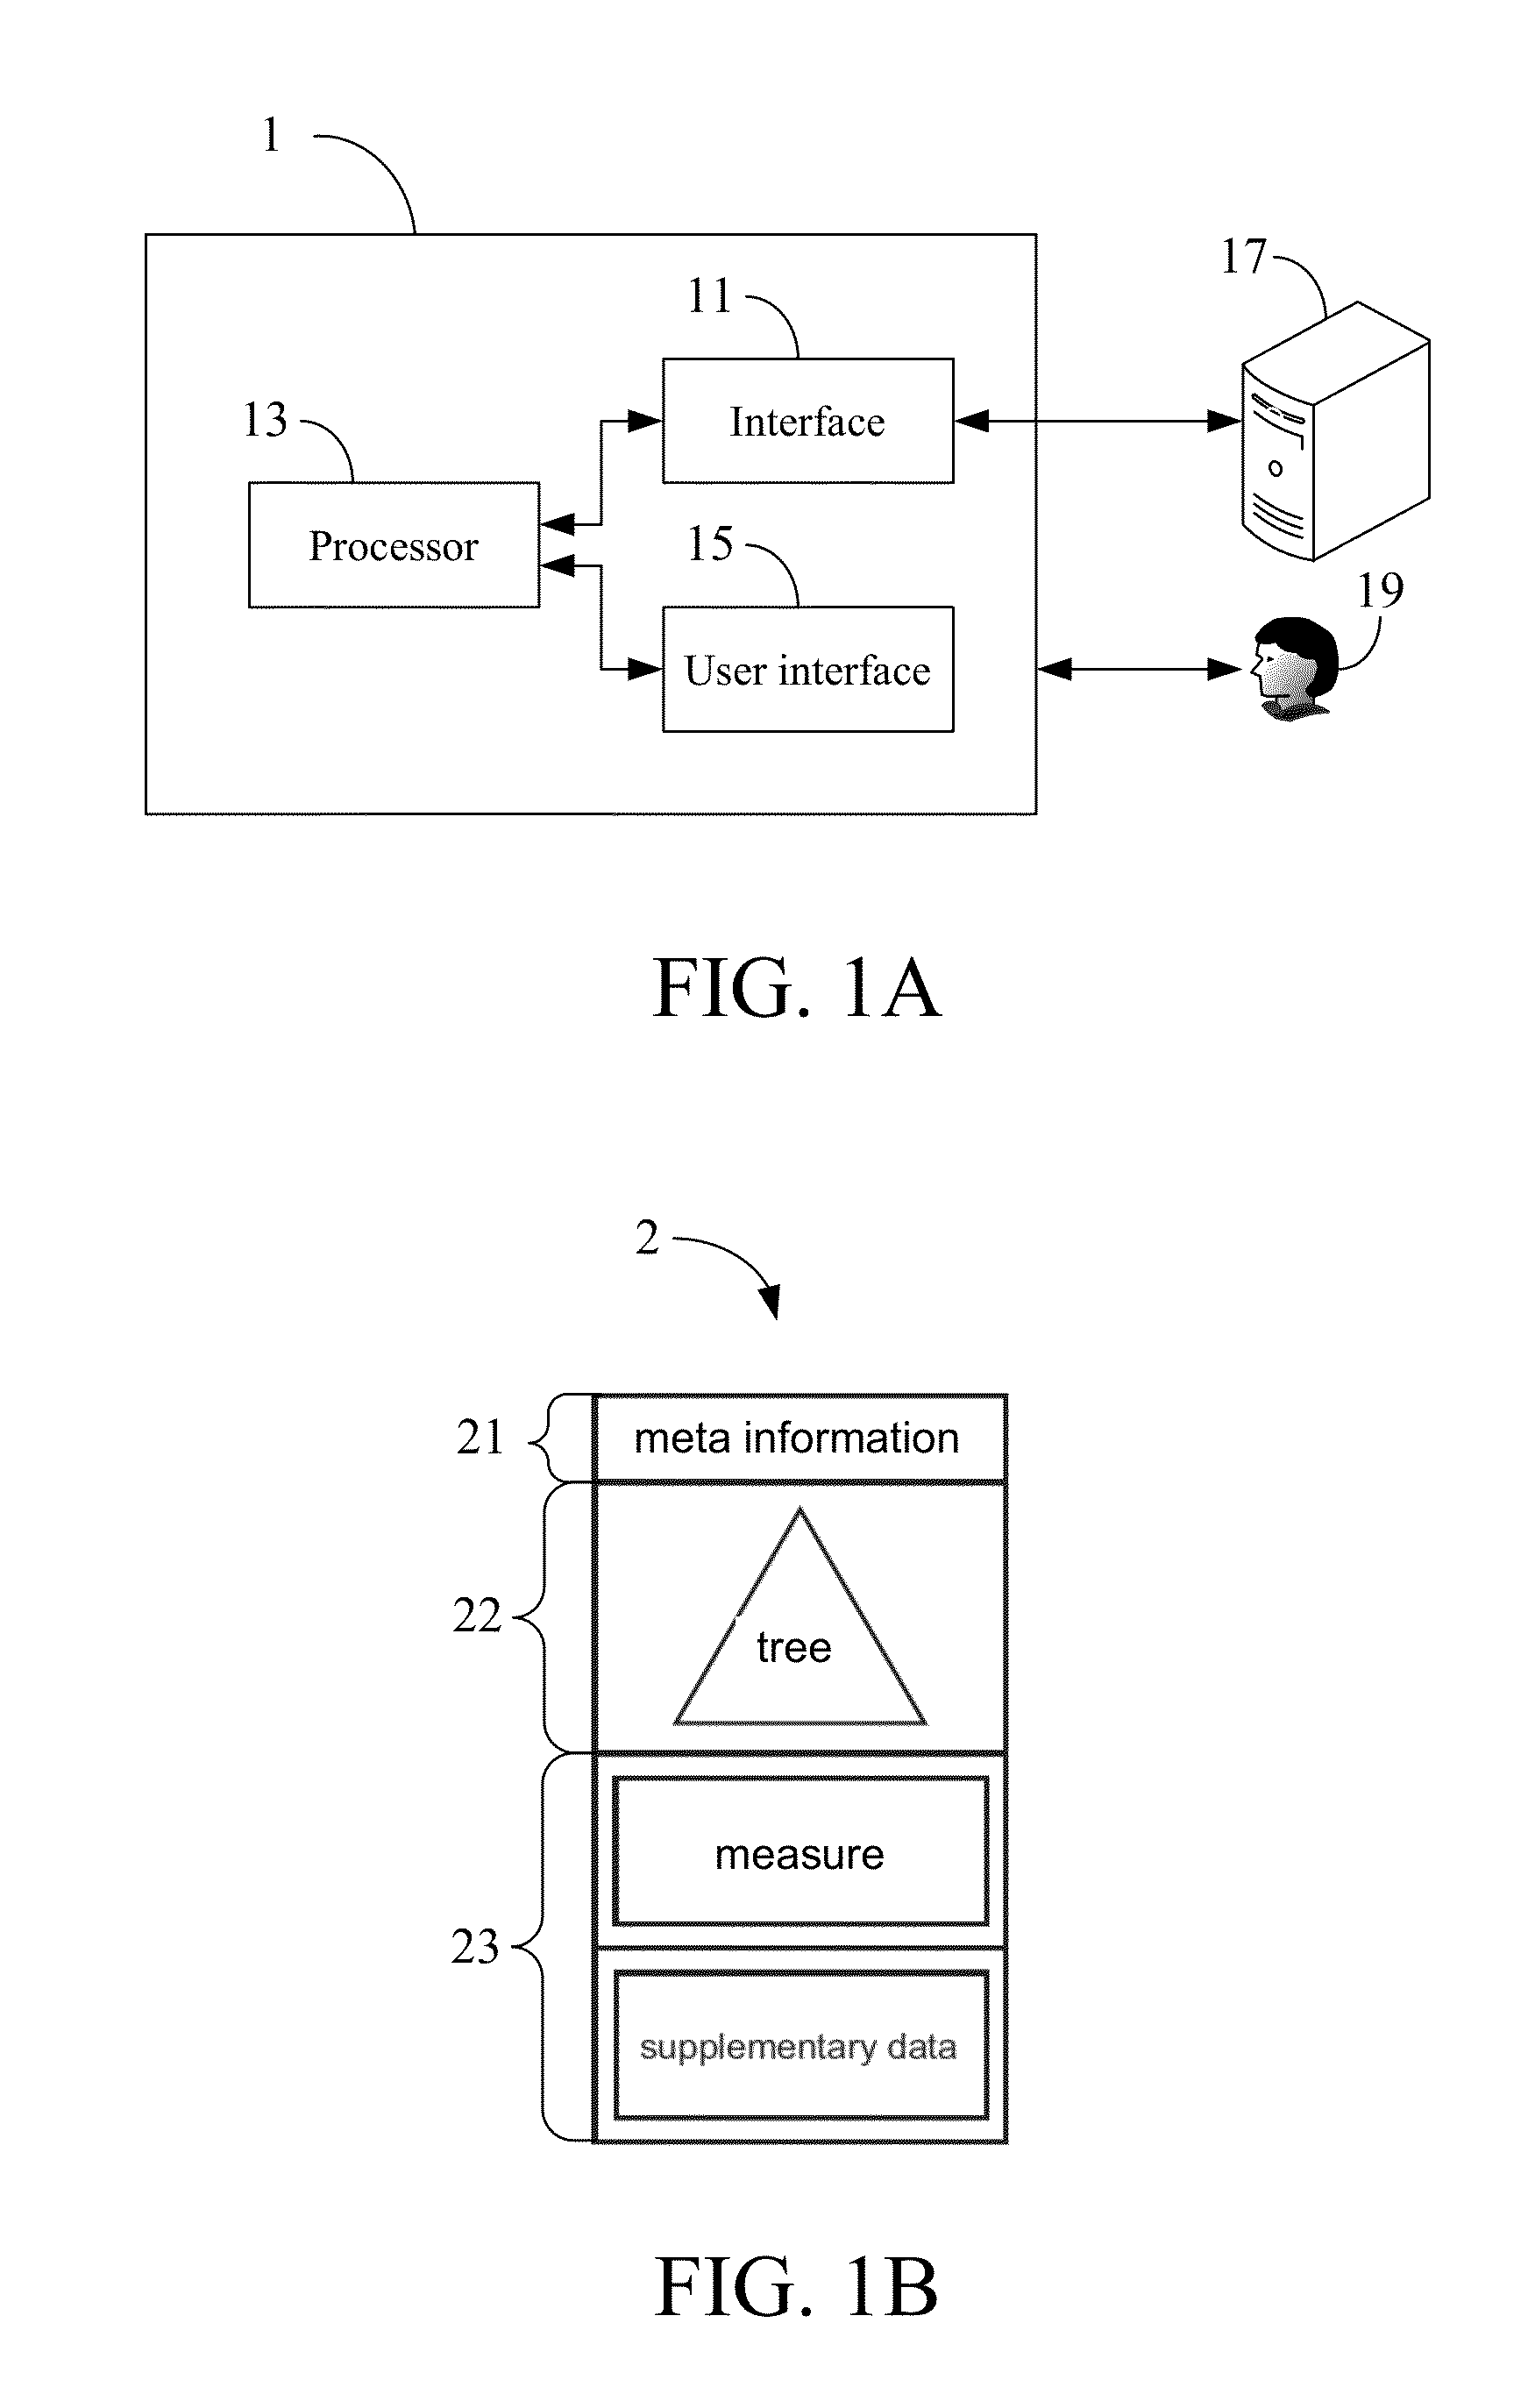 Apparatus and method for realizing big data into a big object and non-transitory tangible machine-readable medium thereof